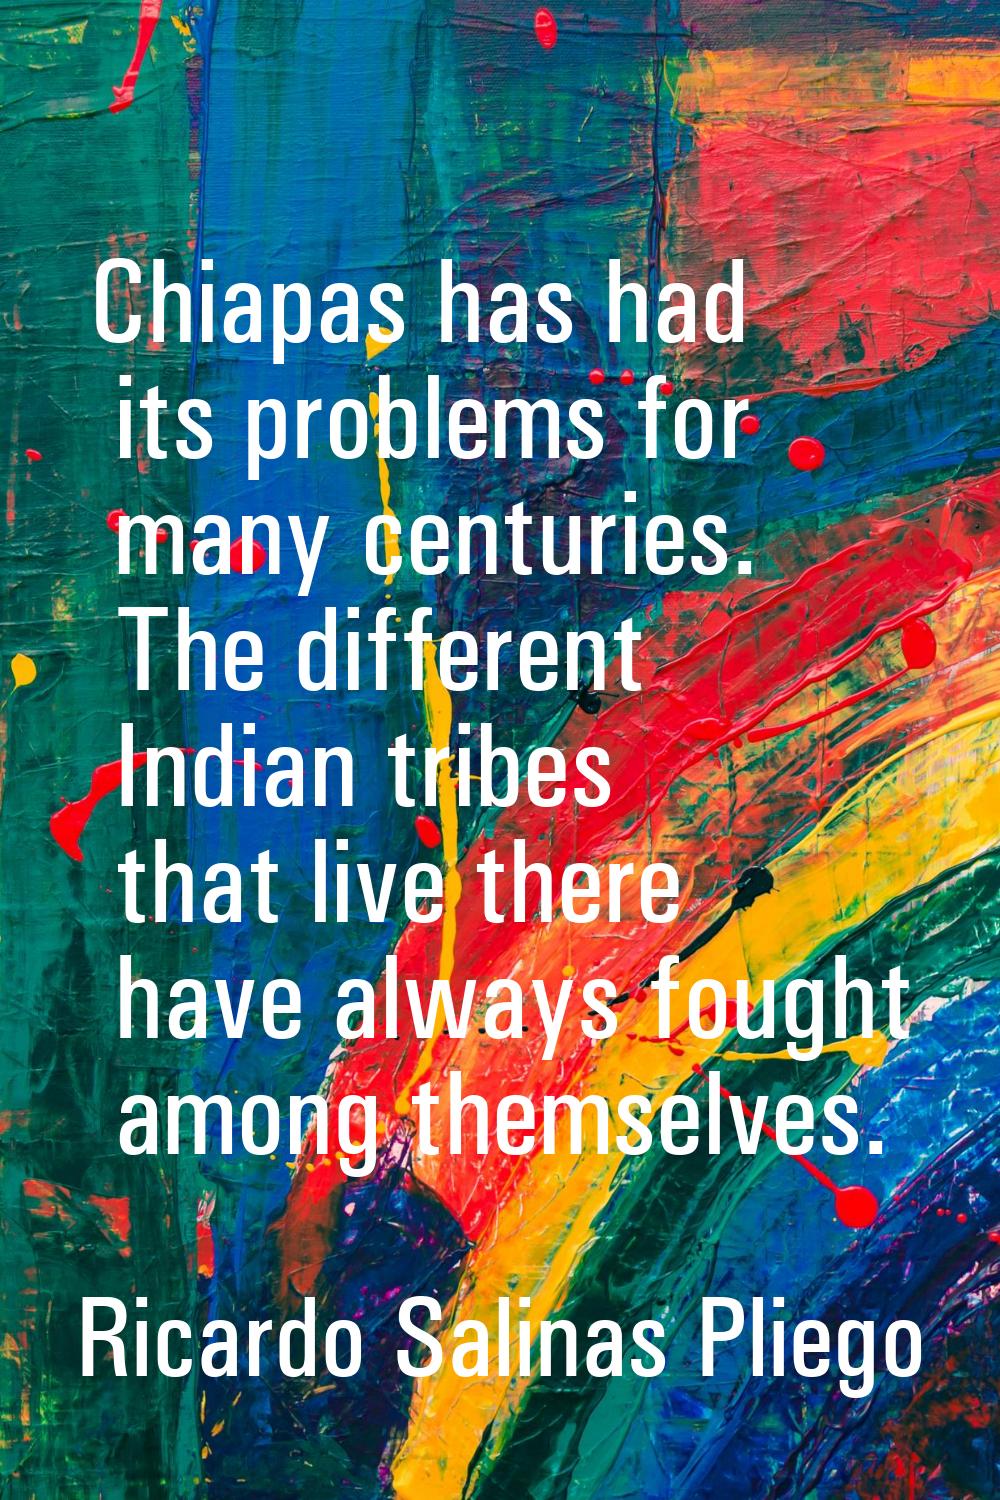 Chiapas has had its problems for many centuries. The different Indian tribes that live there have a